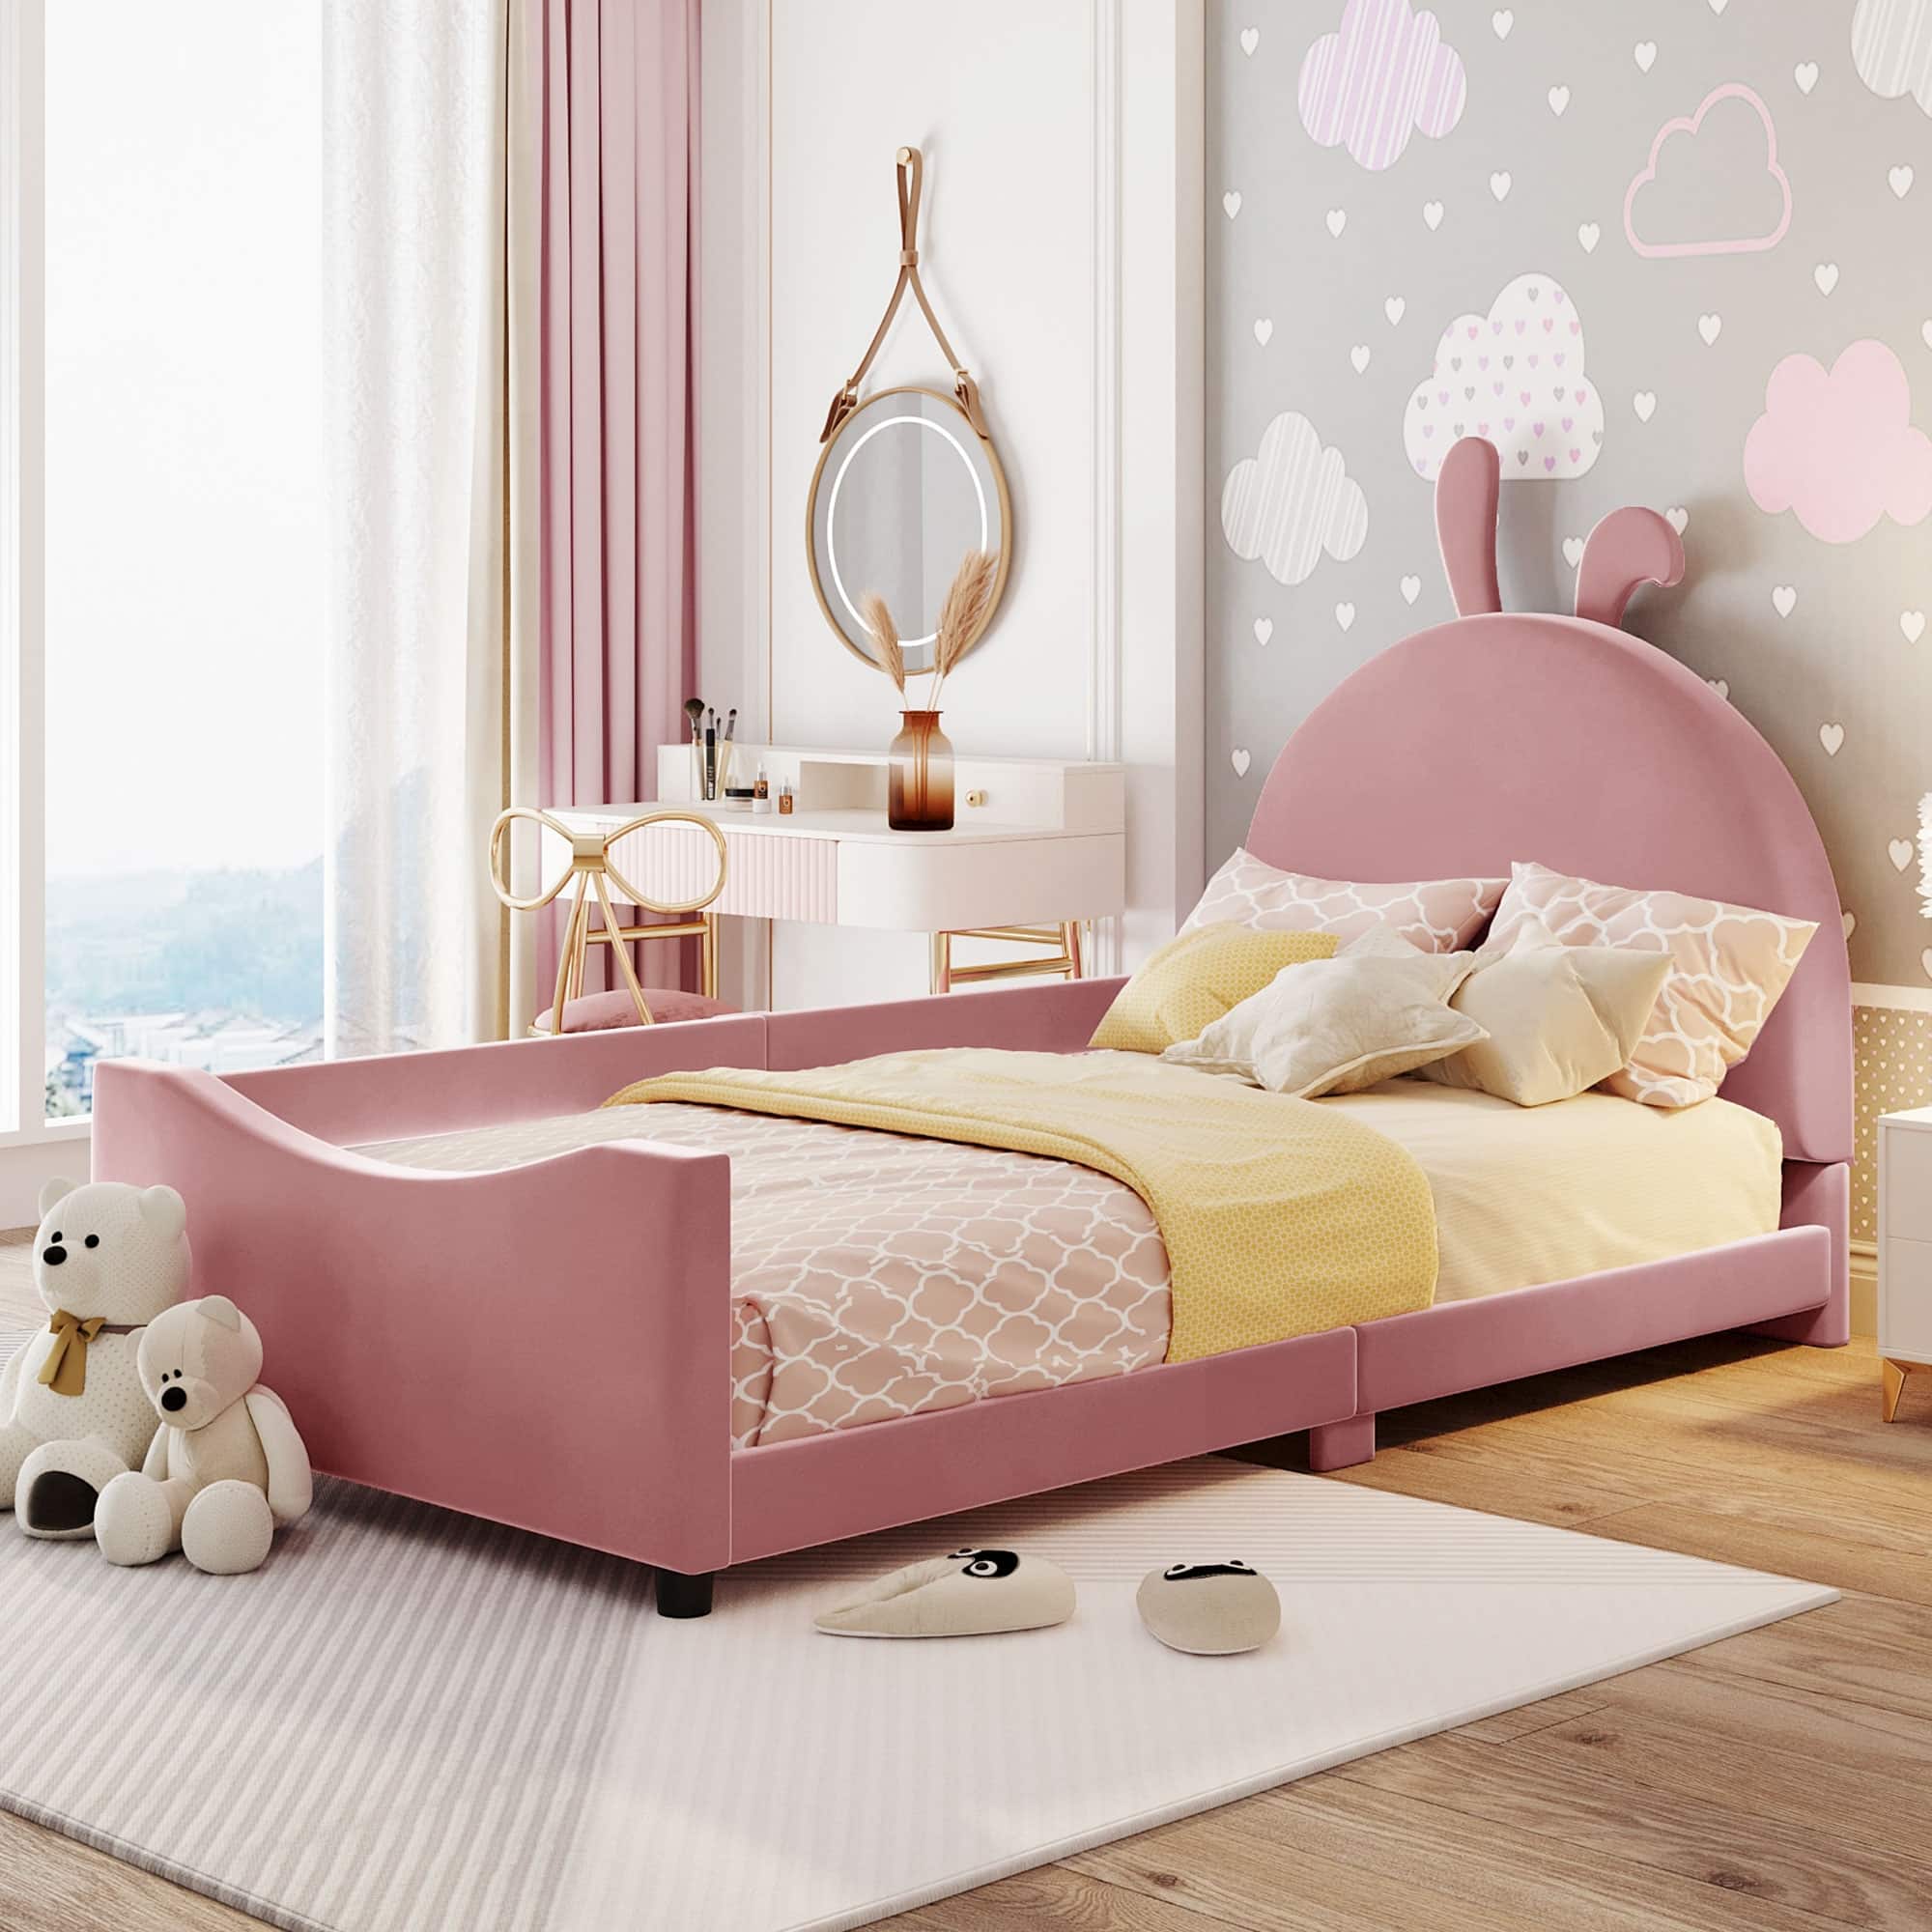 Twin Size Upholstered Daybed with Rabbit Ear Shaped Headboard, Pink ...